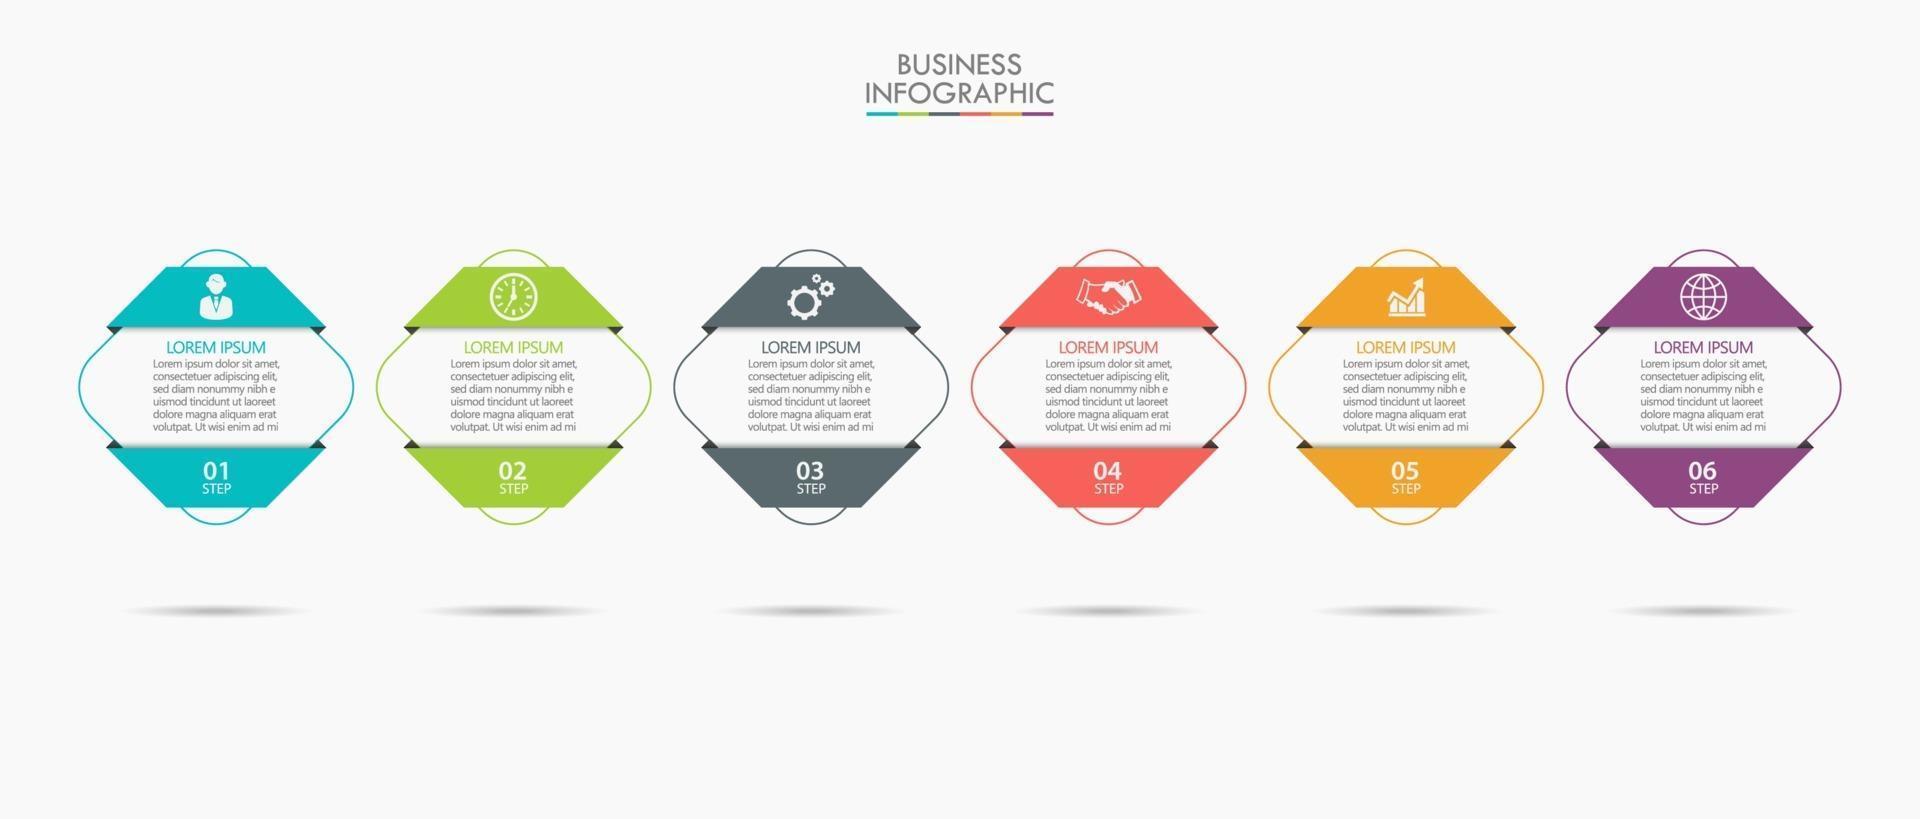 Square Shape Thin Line Business Infographic Template With 6 Options vector